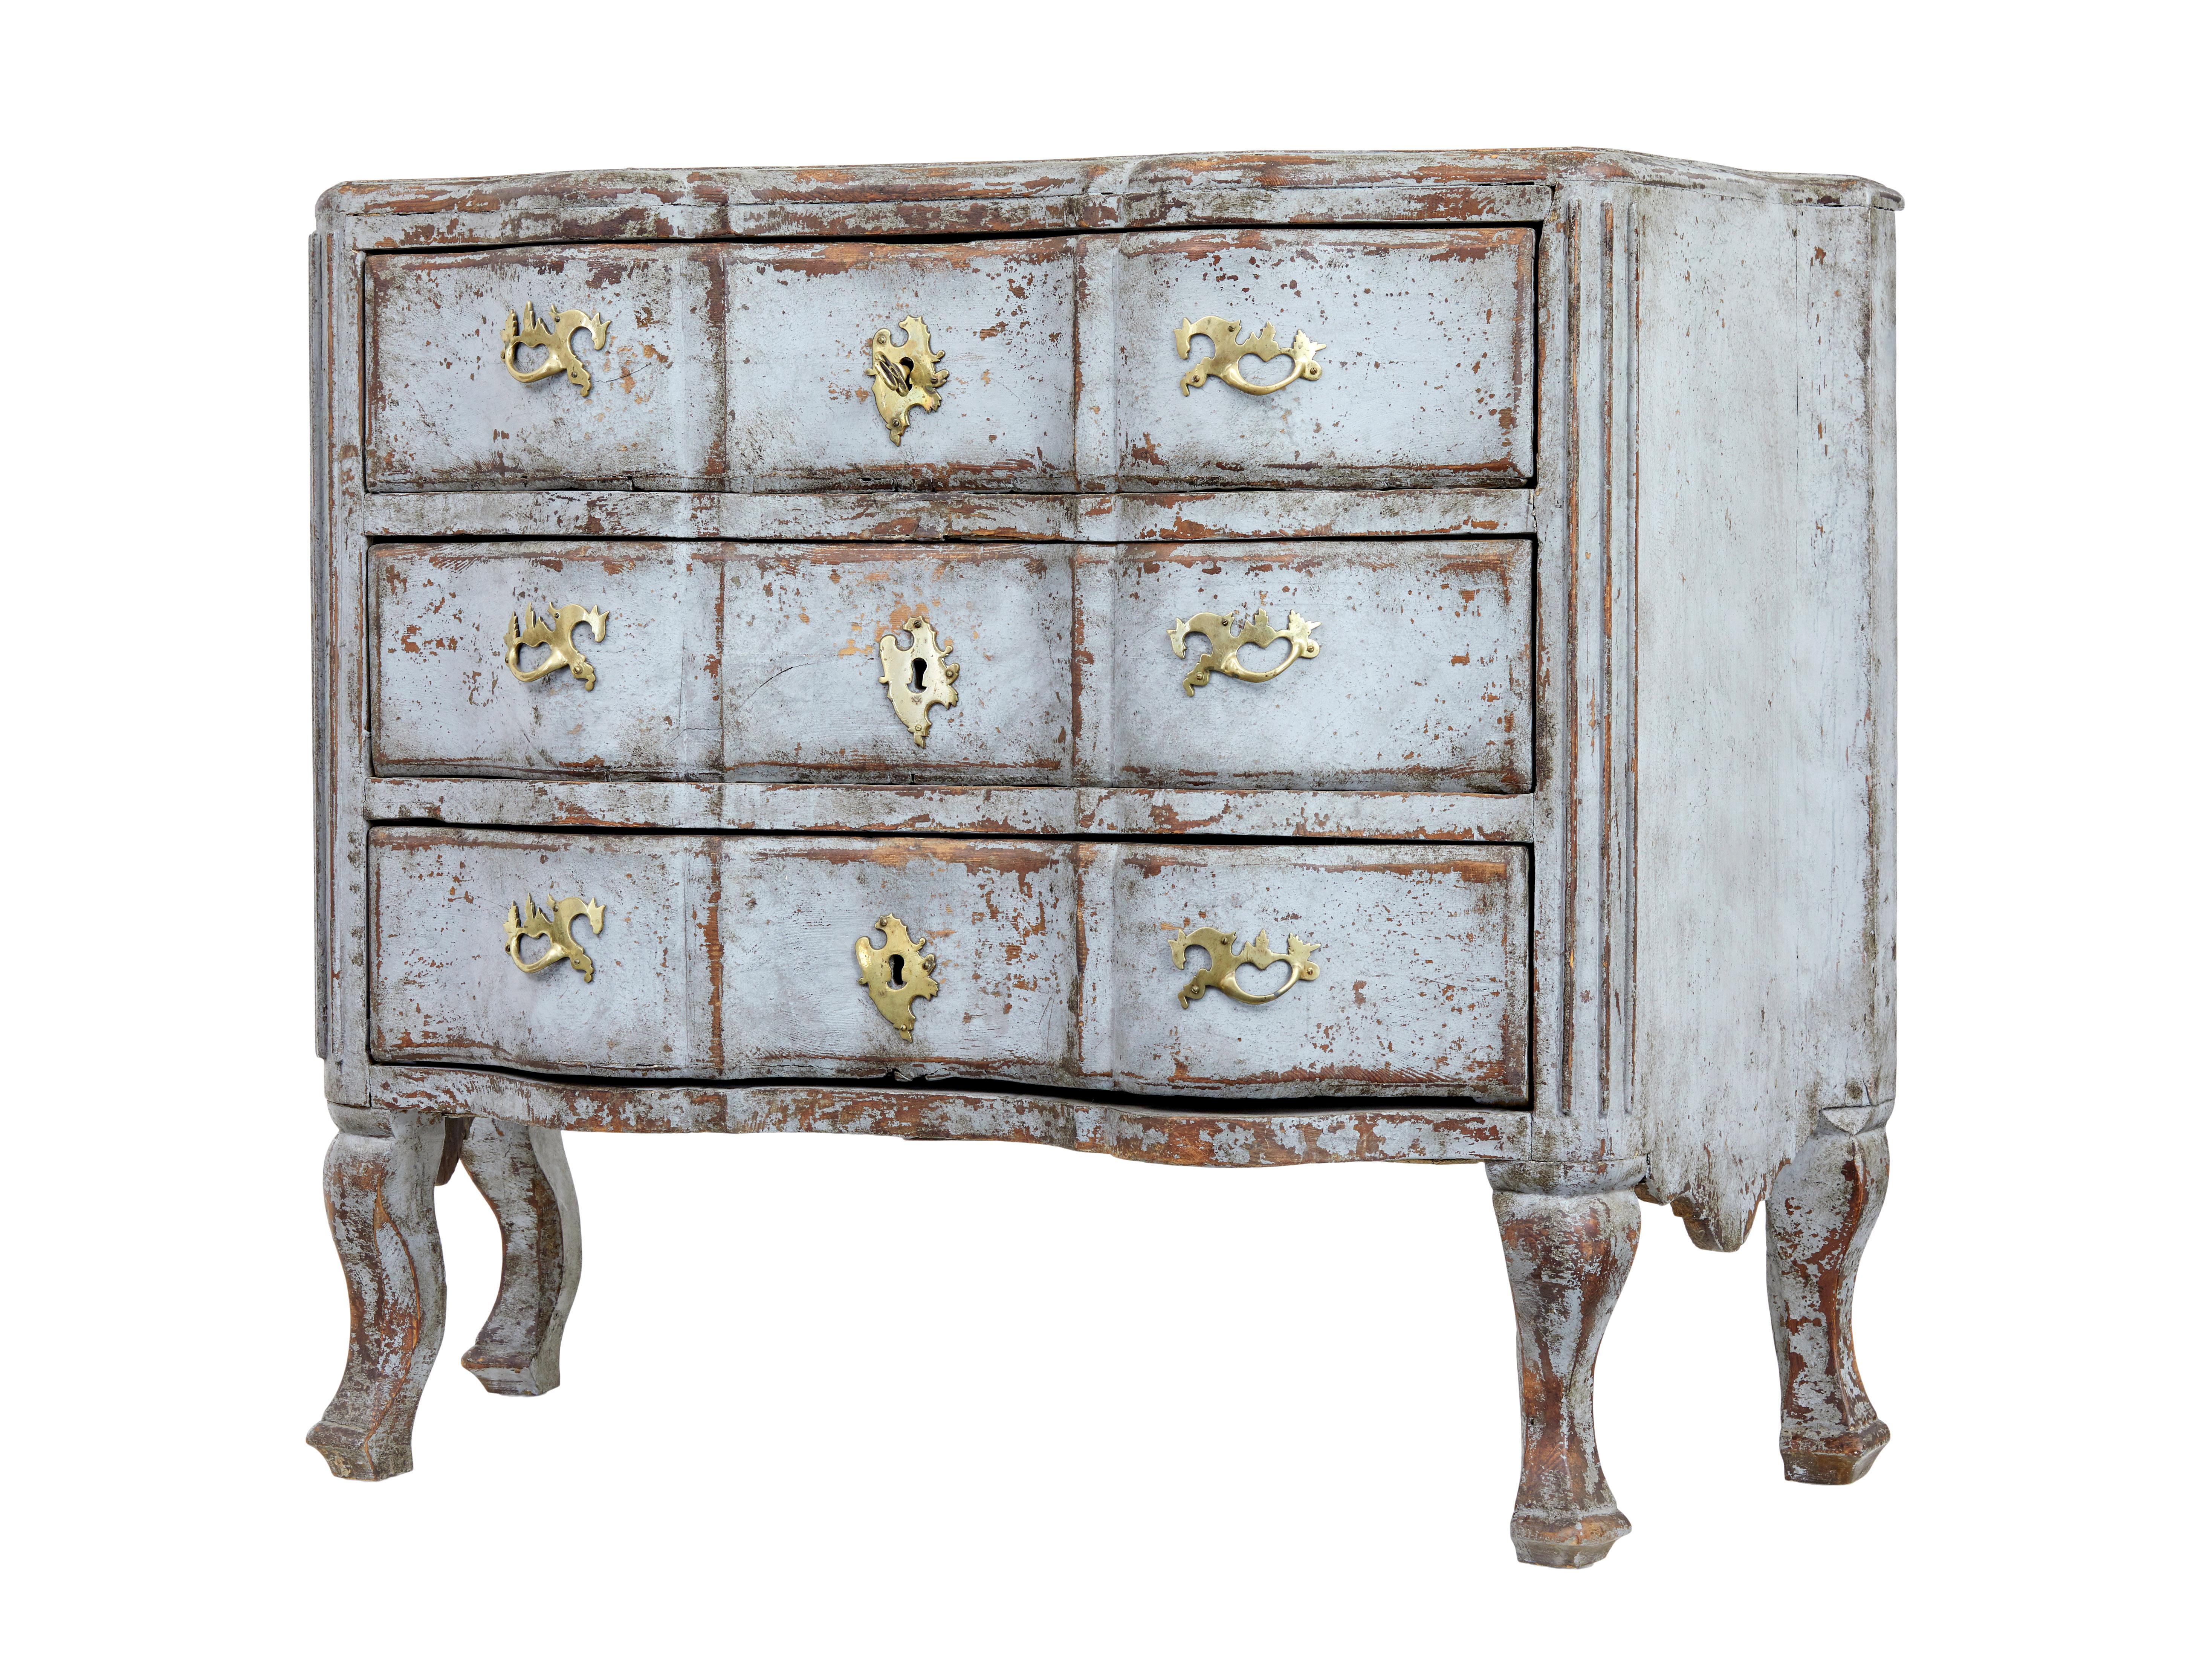 Early 19th century Swedish painted baroque revival chest of drawers For Sale 3